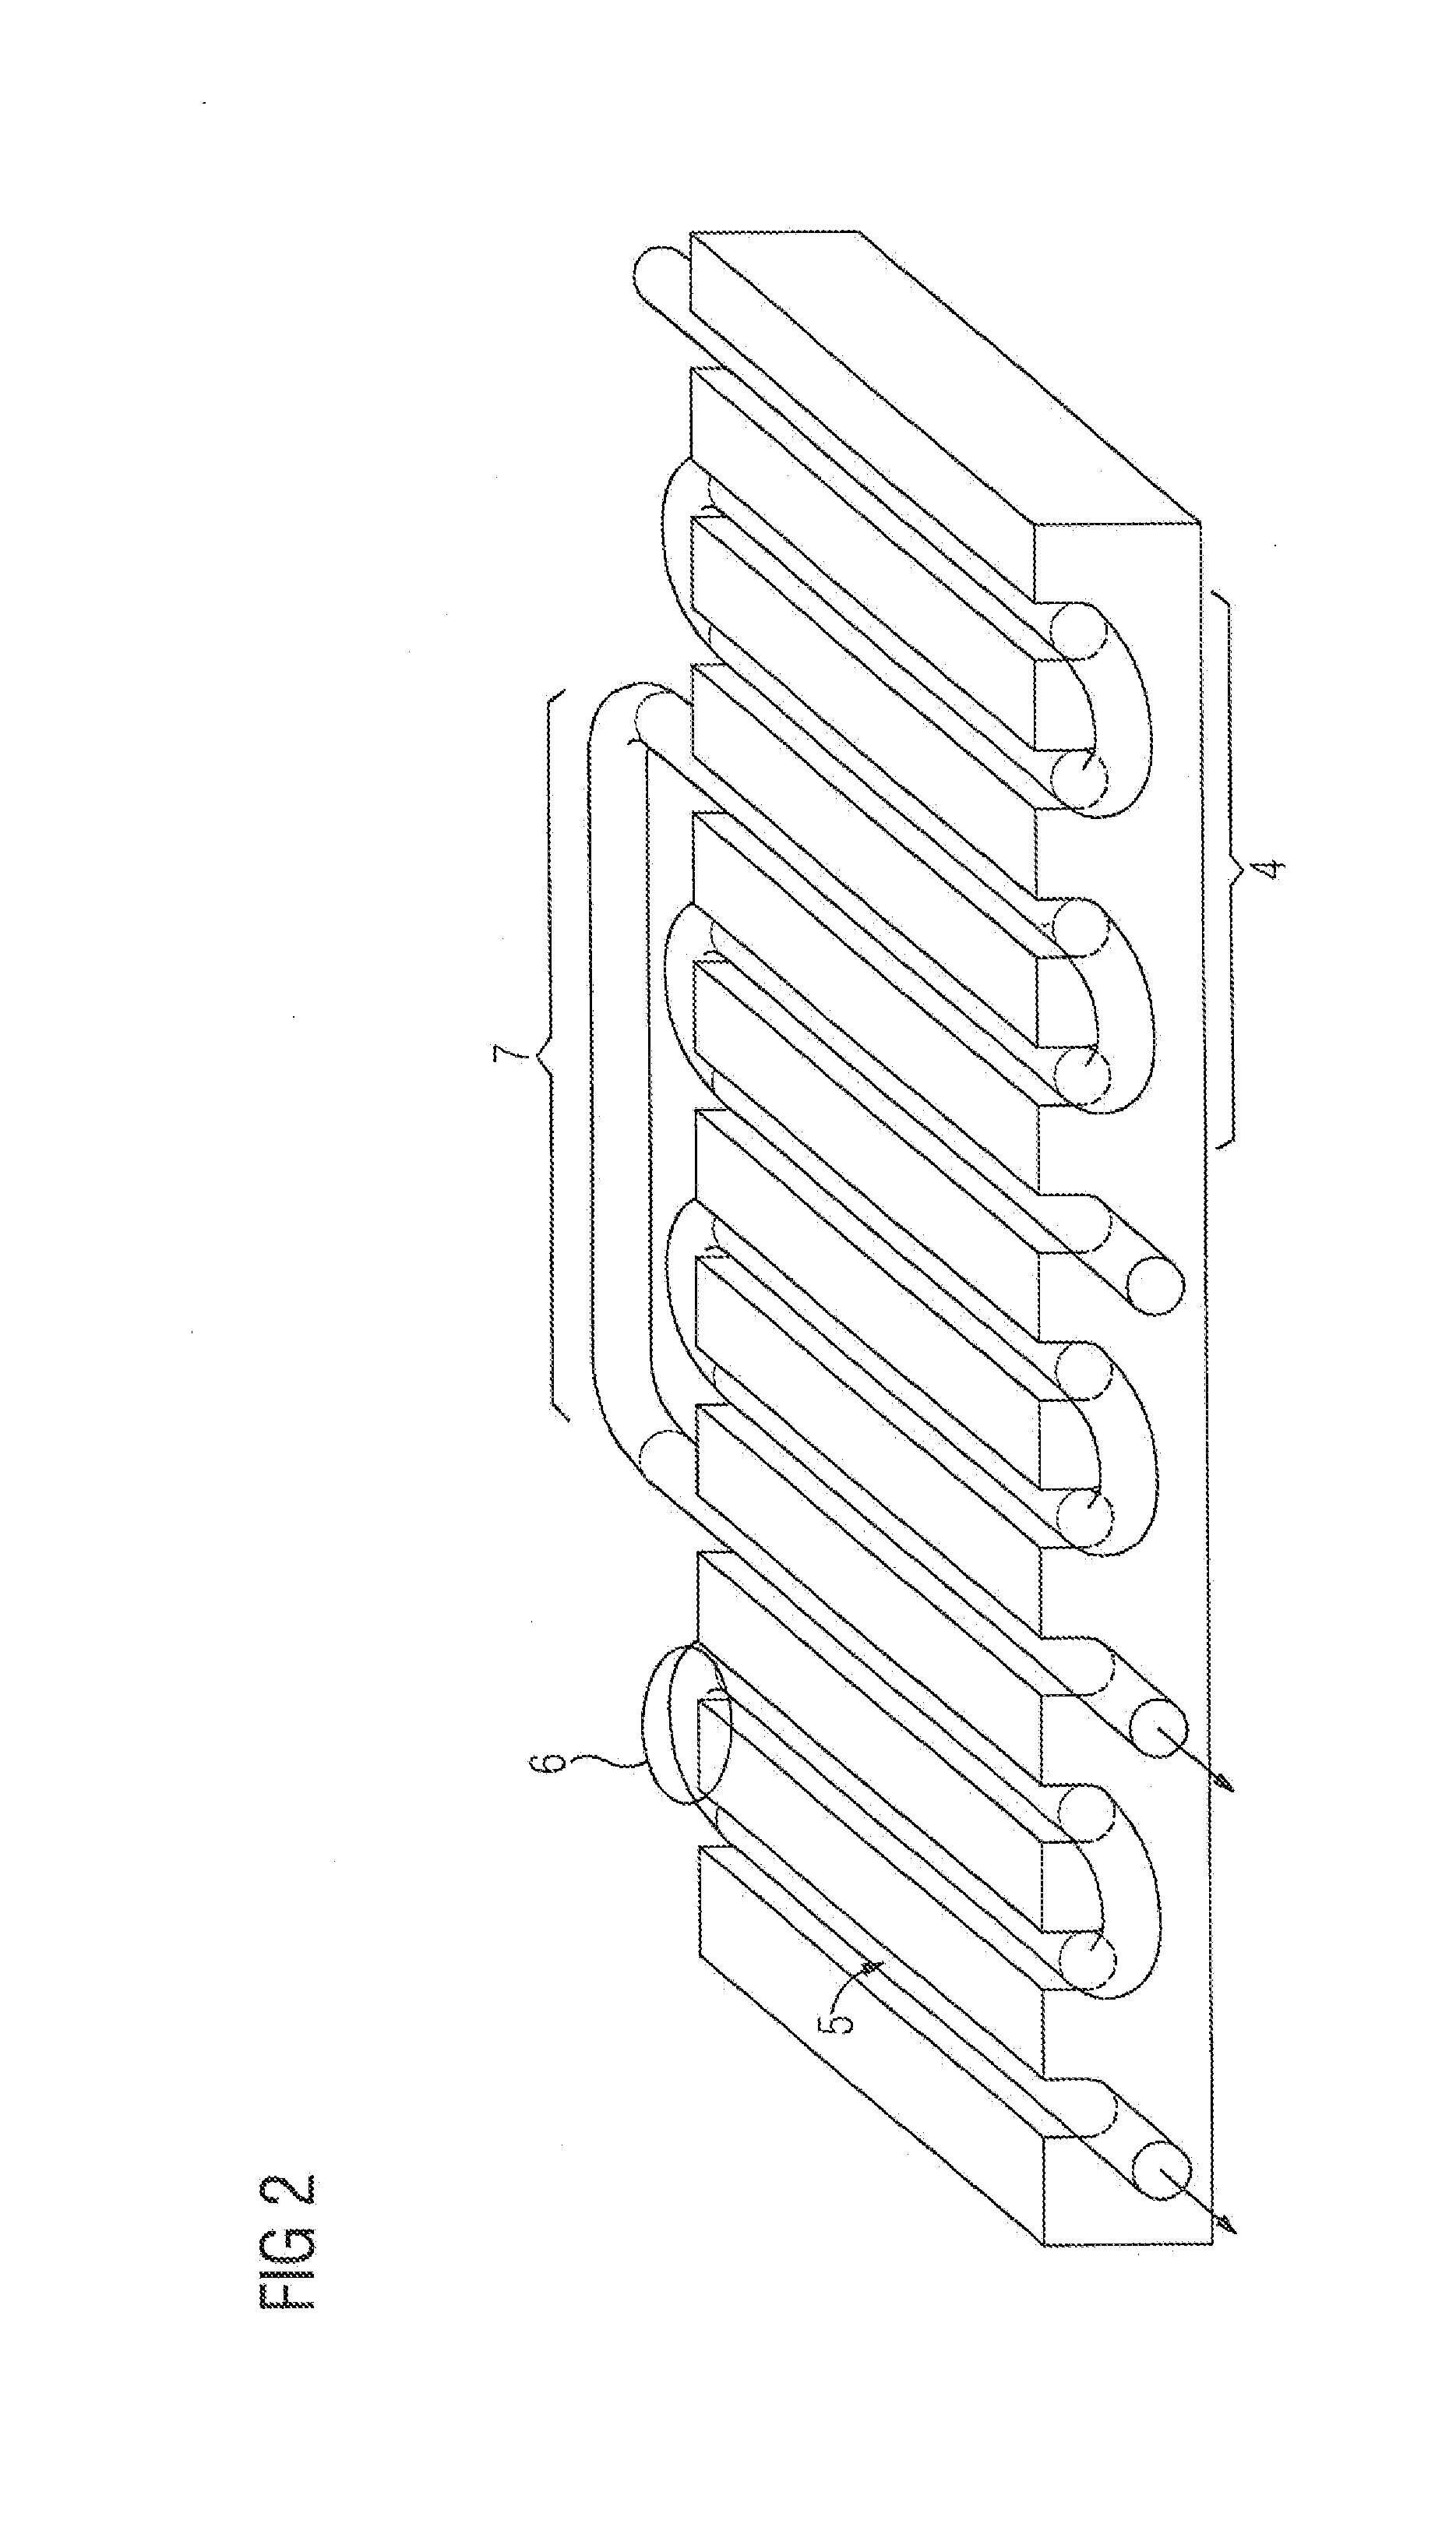 Device for cooling a component of an electrical machine using cooling coils